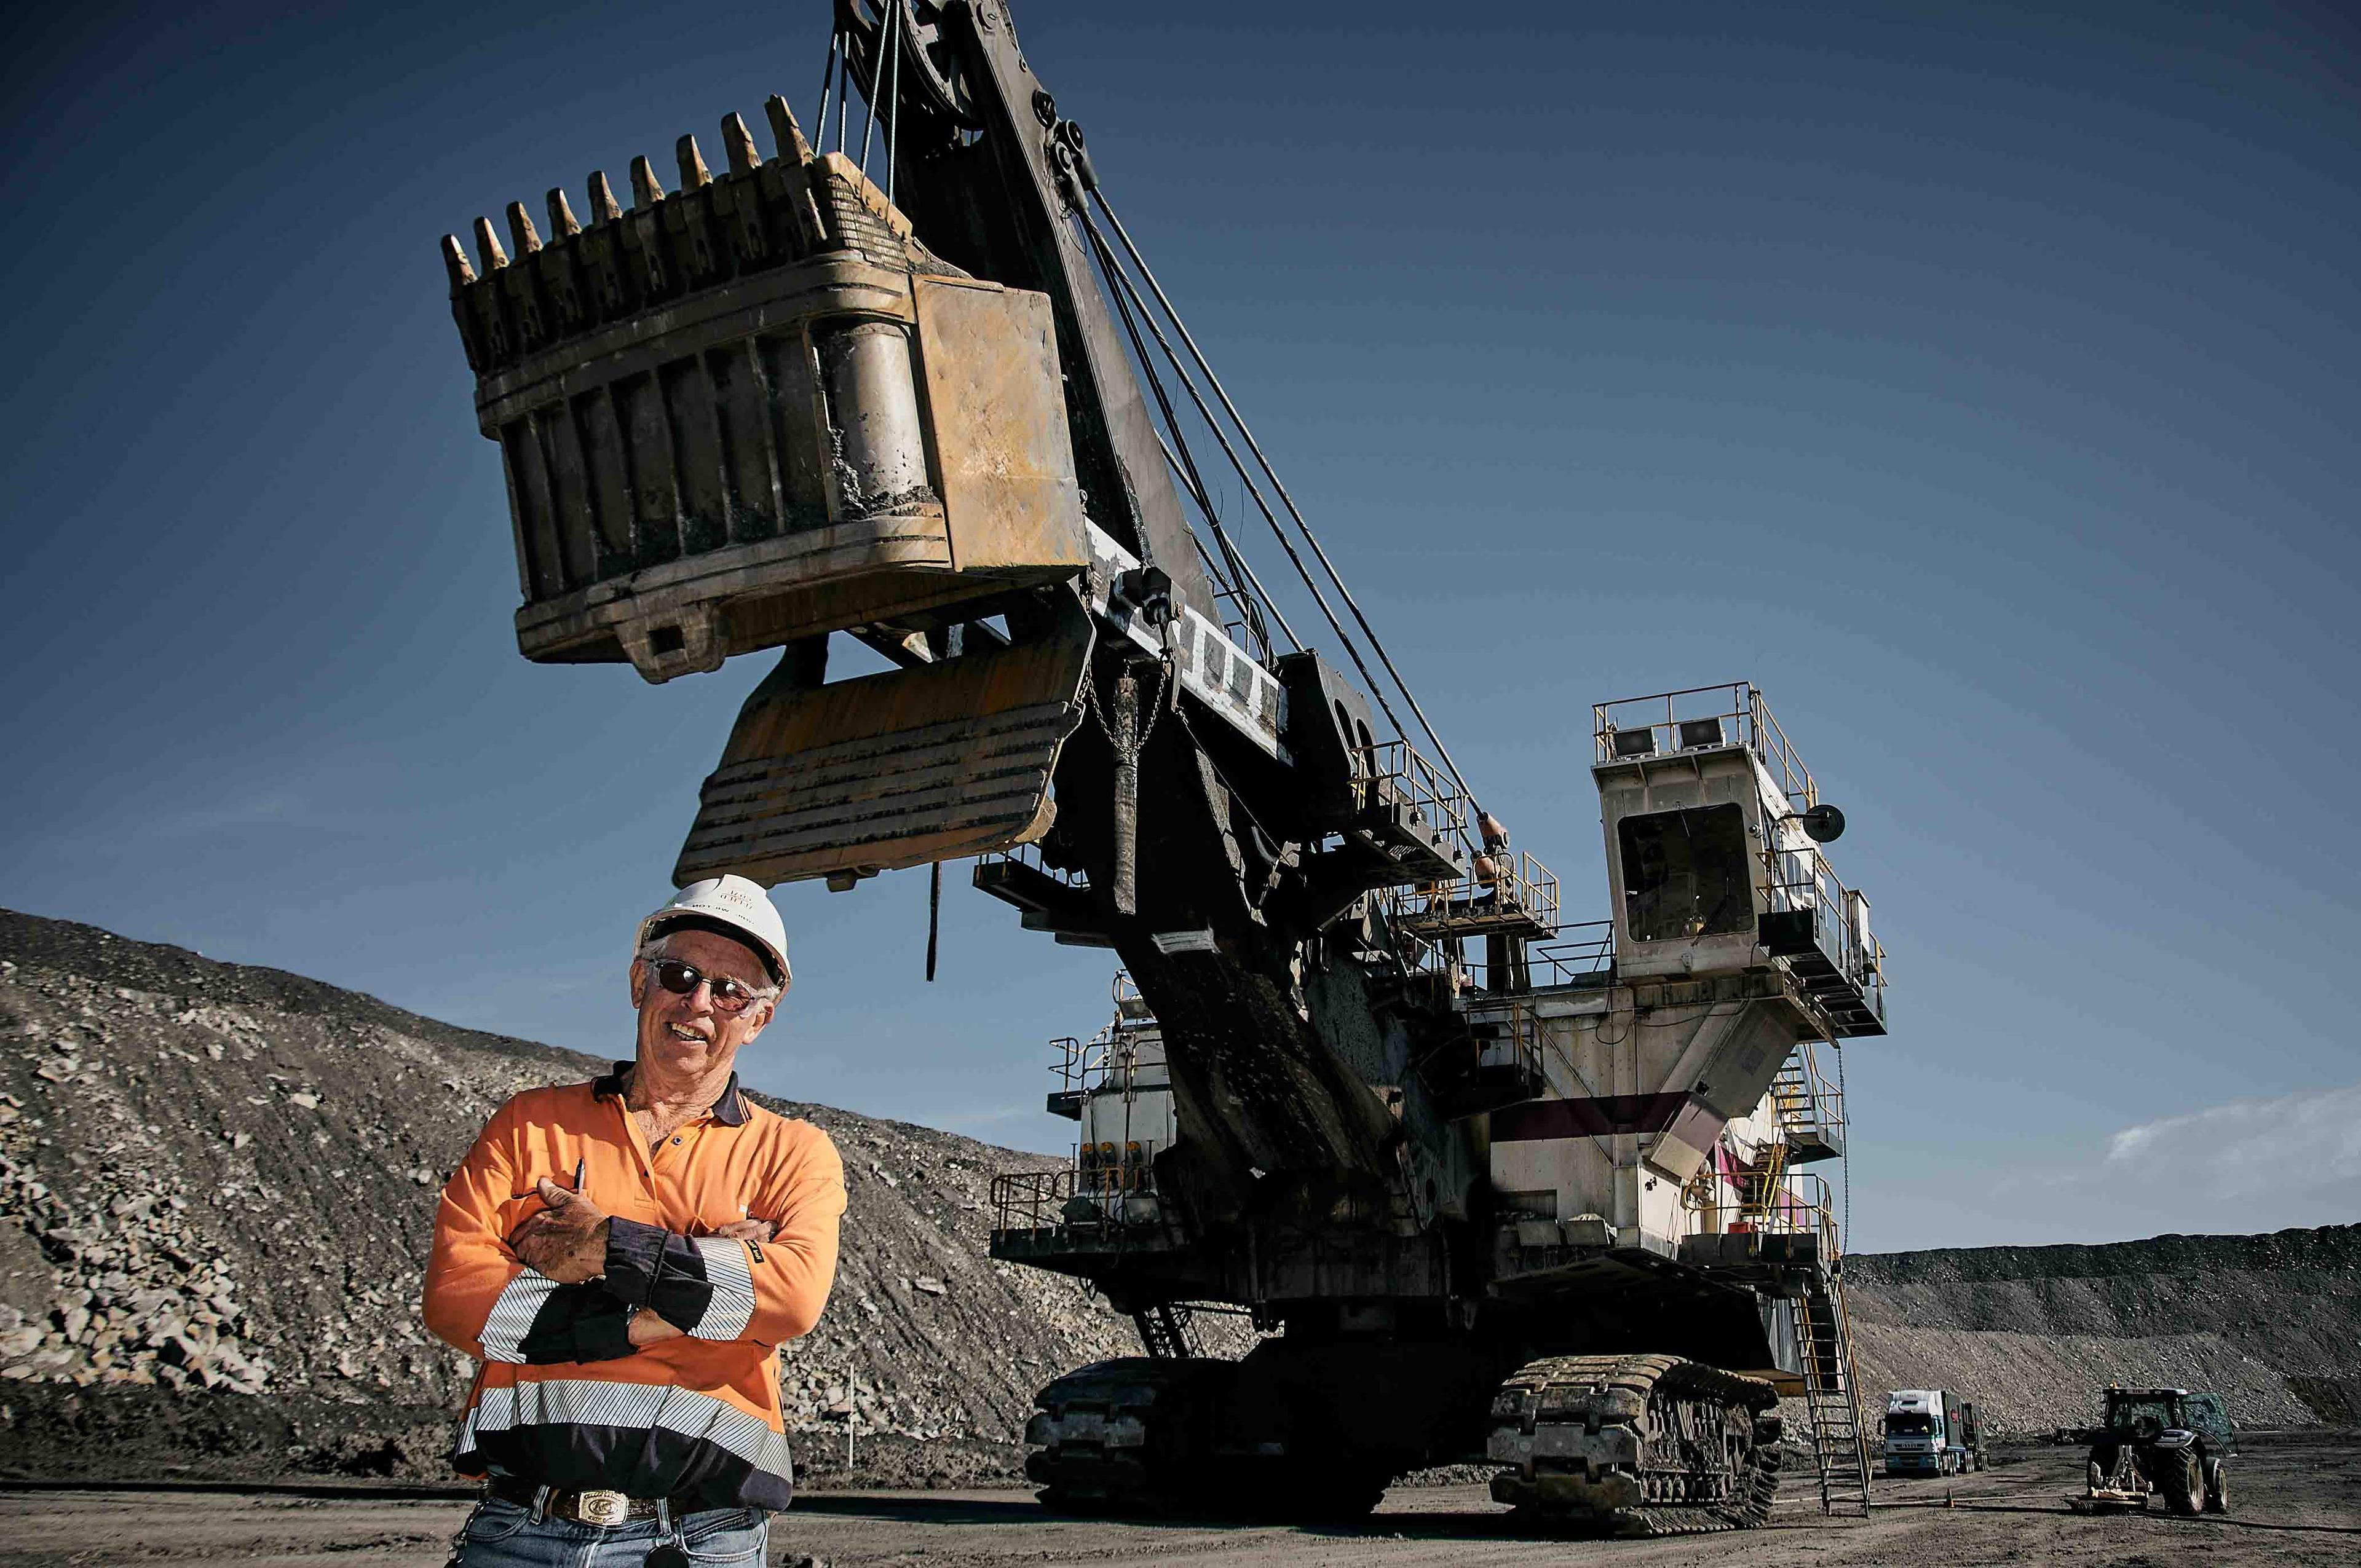 A smiling mine worker wearing protective equipment and standing in front of heavy machinery.